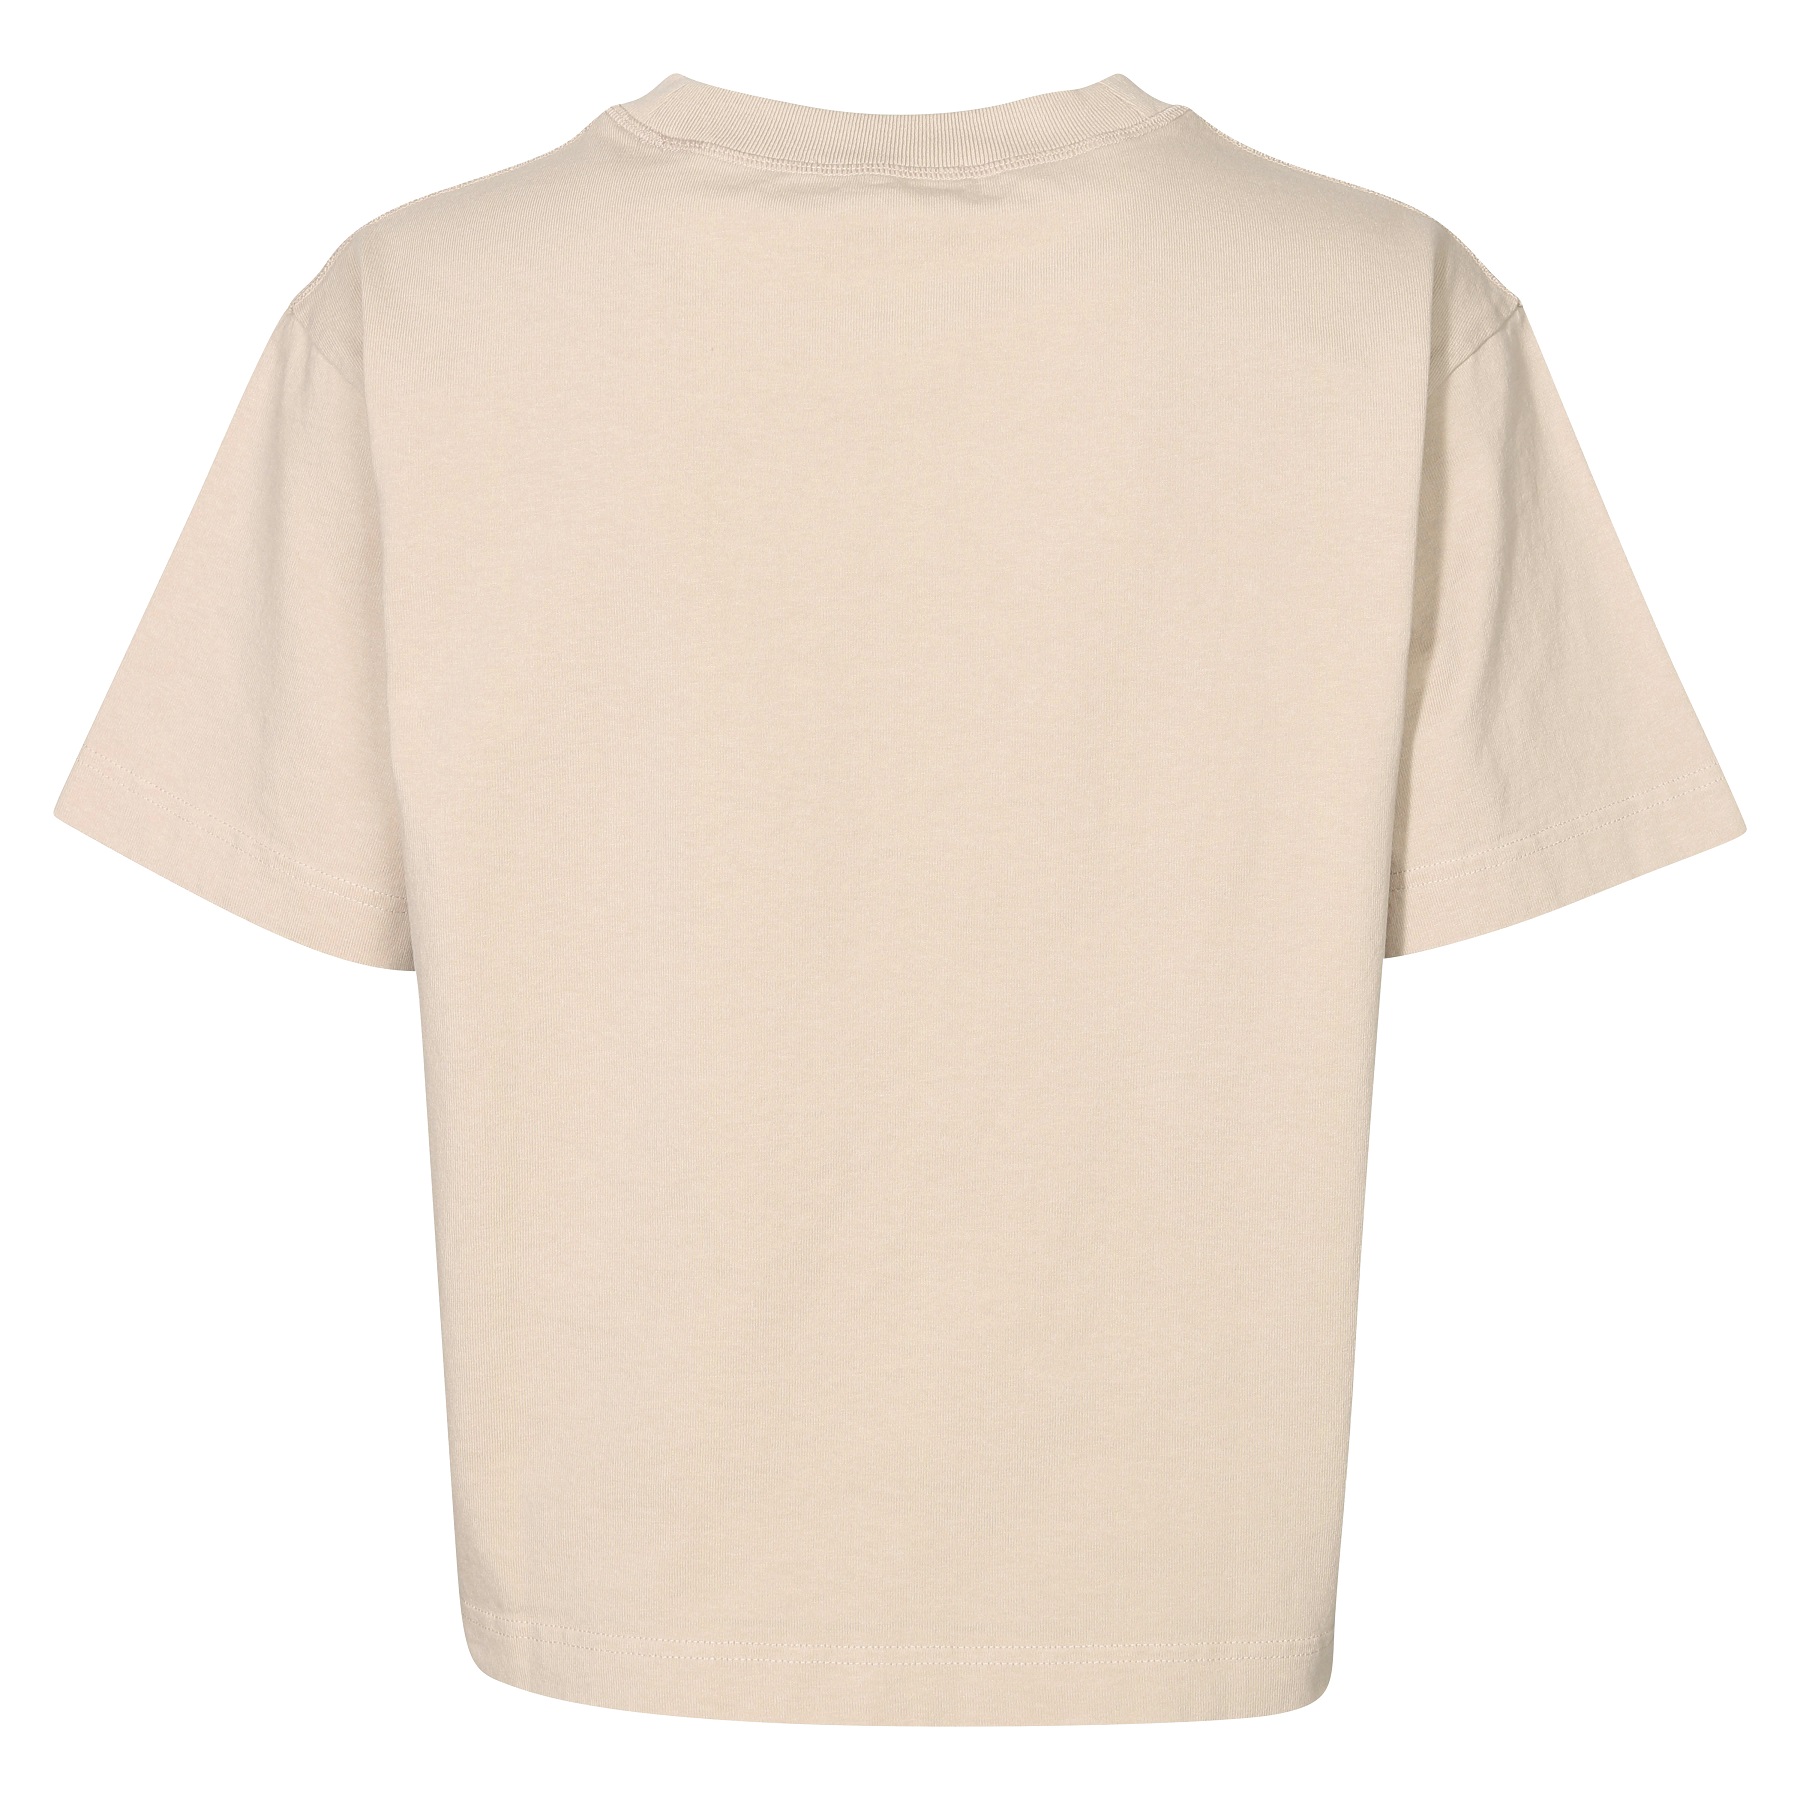 ACNE STUDIOS Stamp T-Shirt in Champagne Beige XS